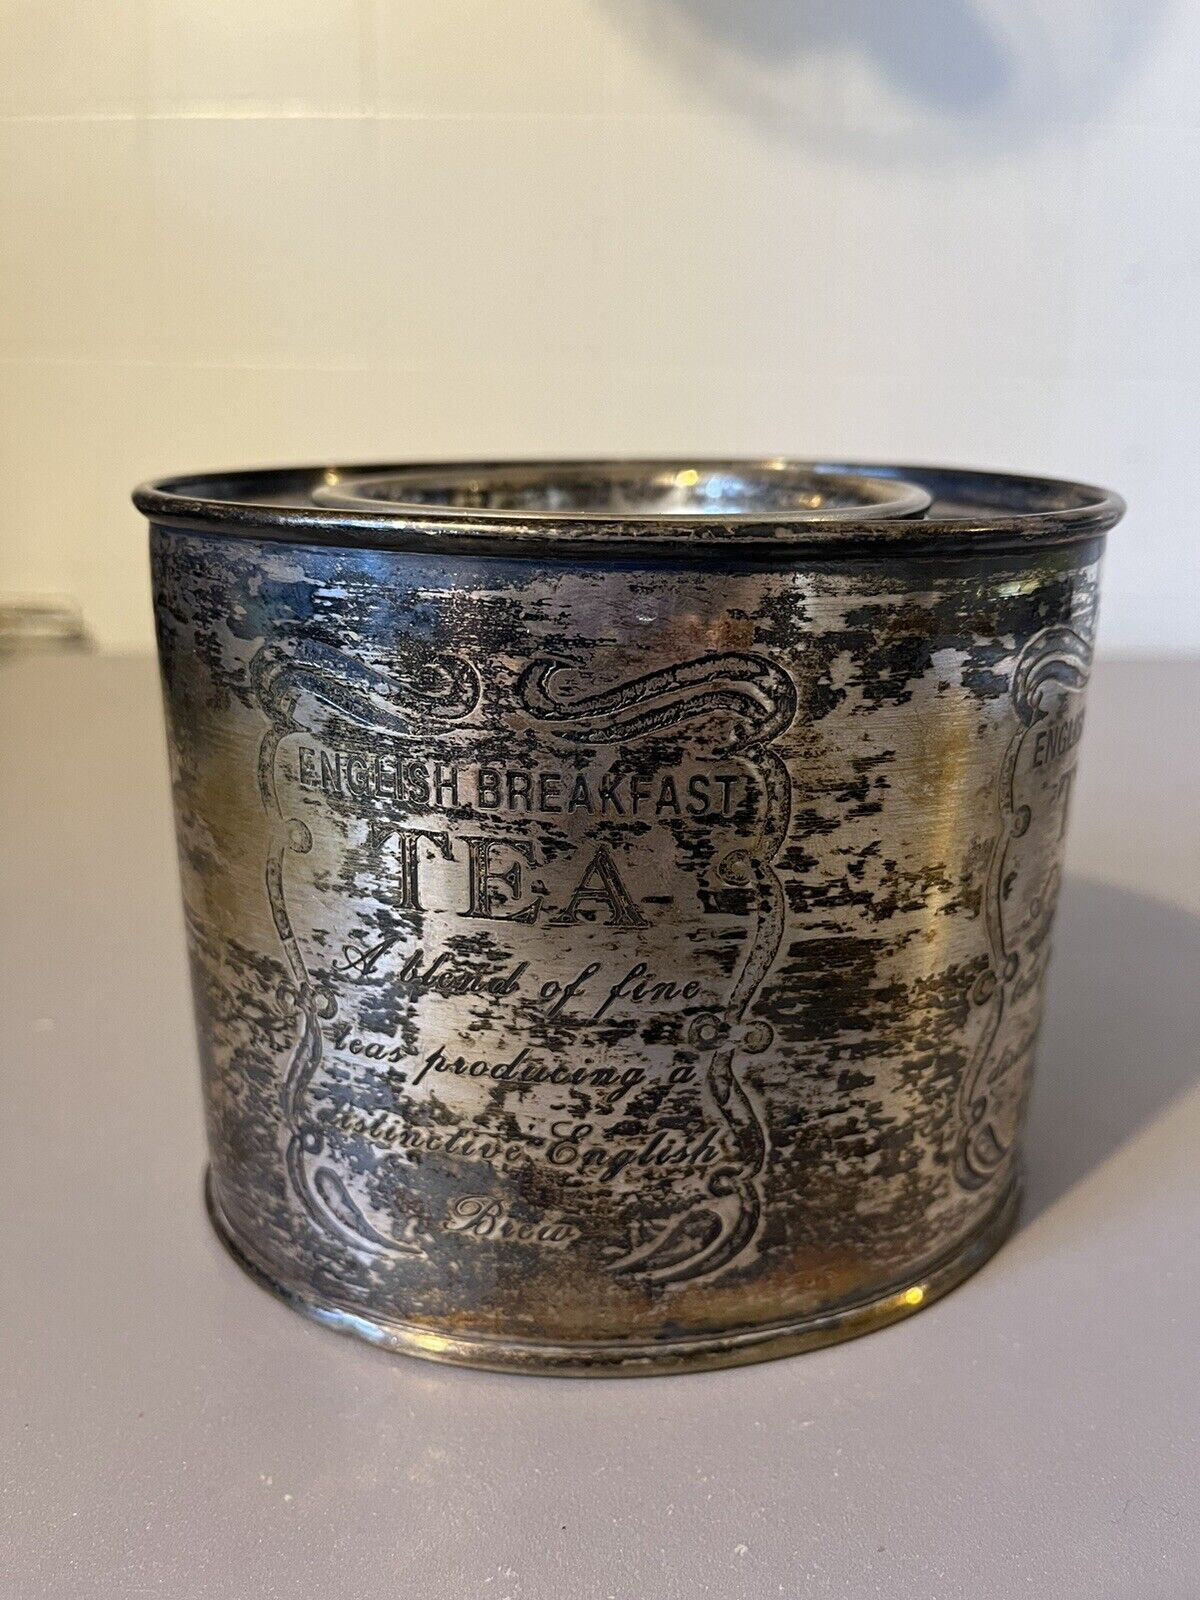 Vintage Silver Plated English Breakfast Decorative Tin Made In India